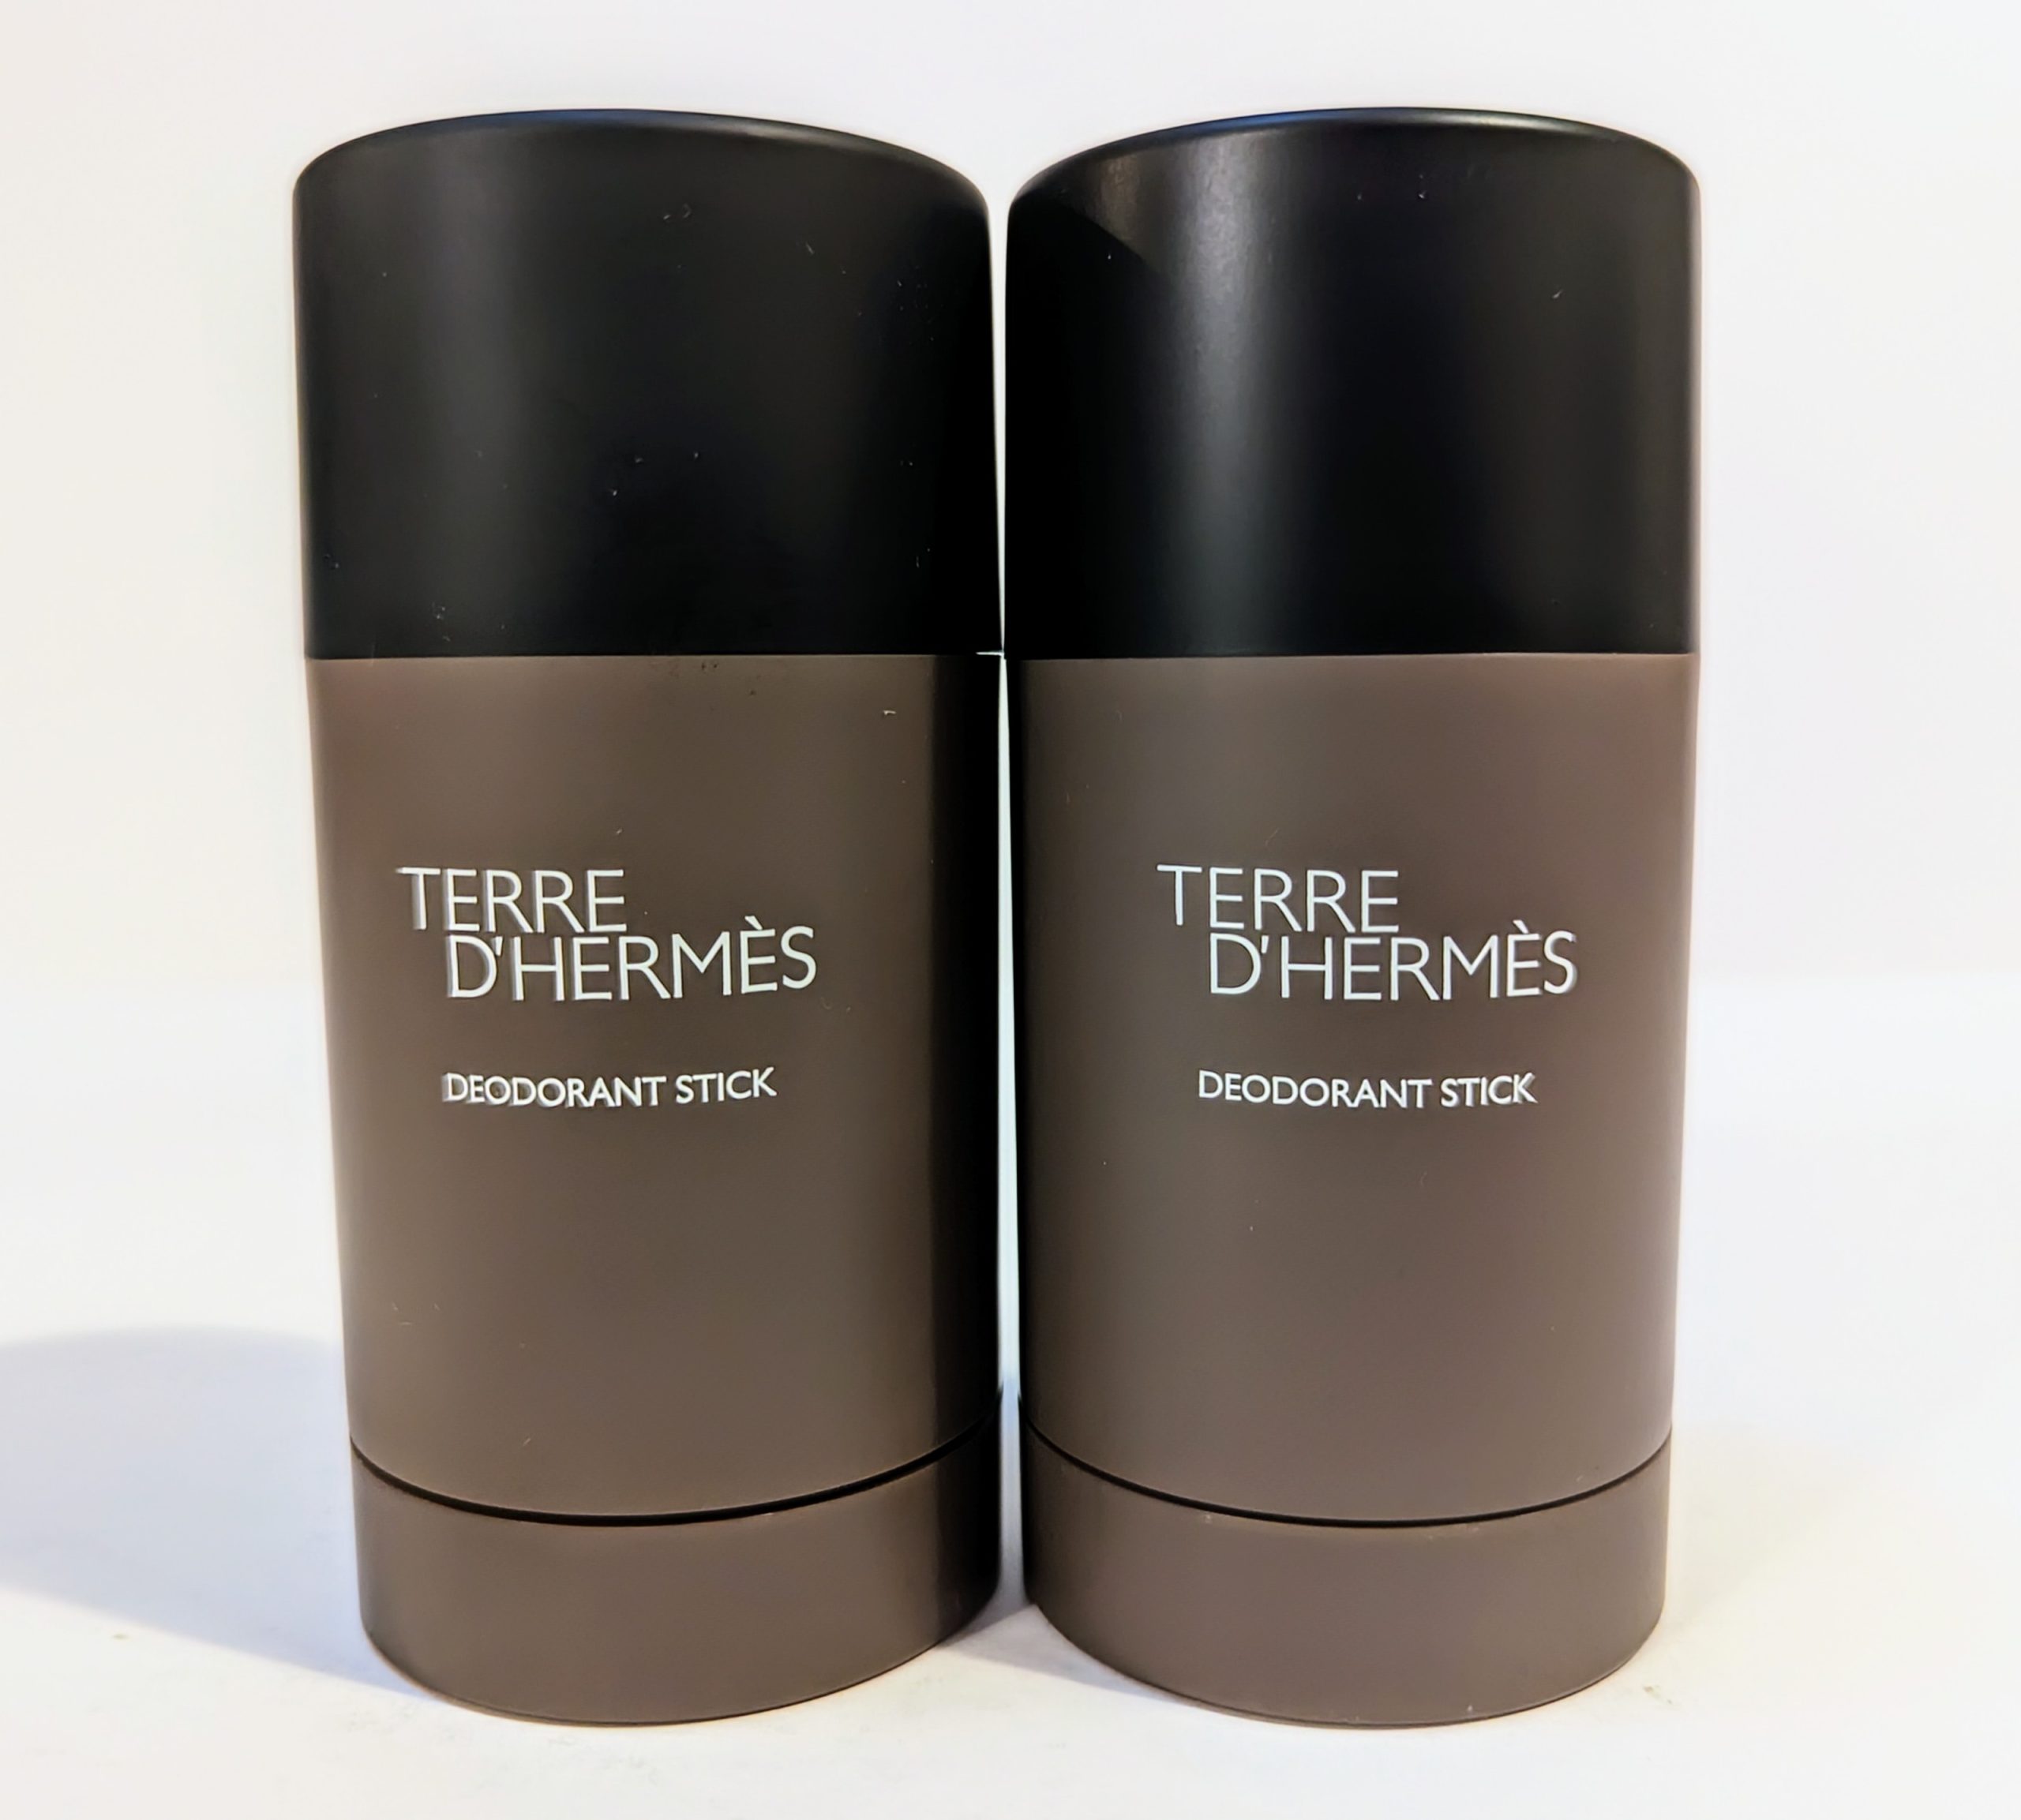 Two Terre d’Hermès deodorant sticks are placed side by side against a white background.